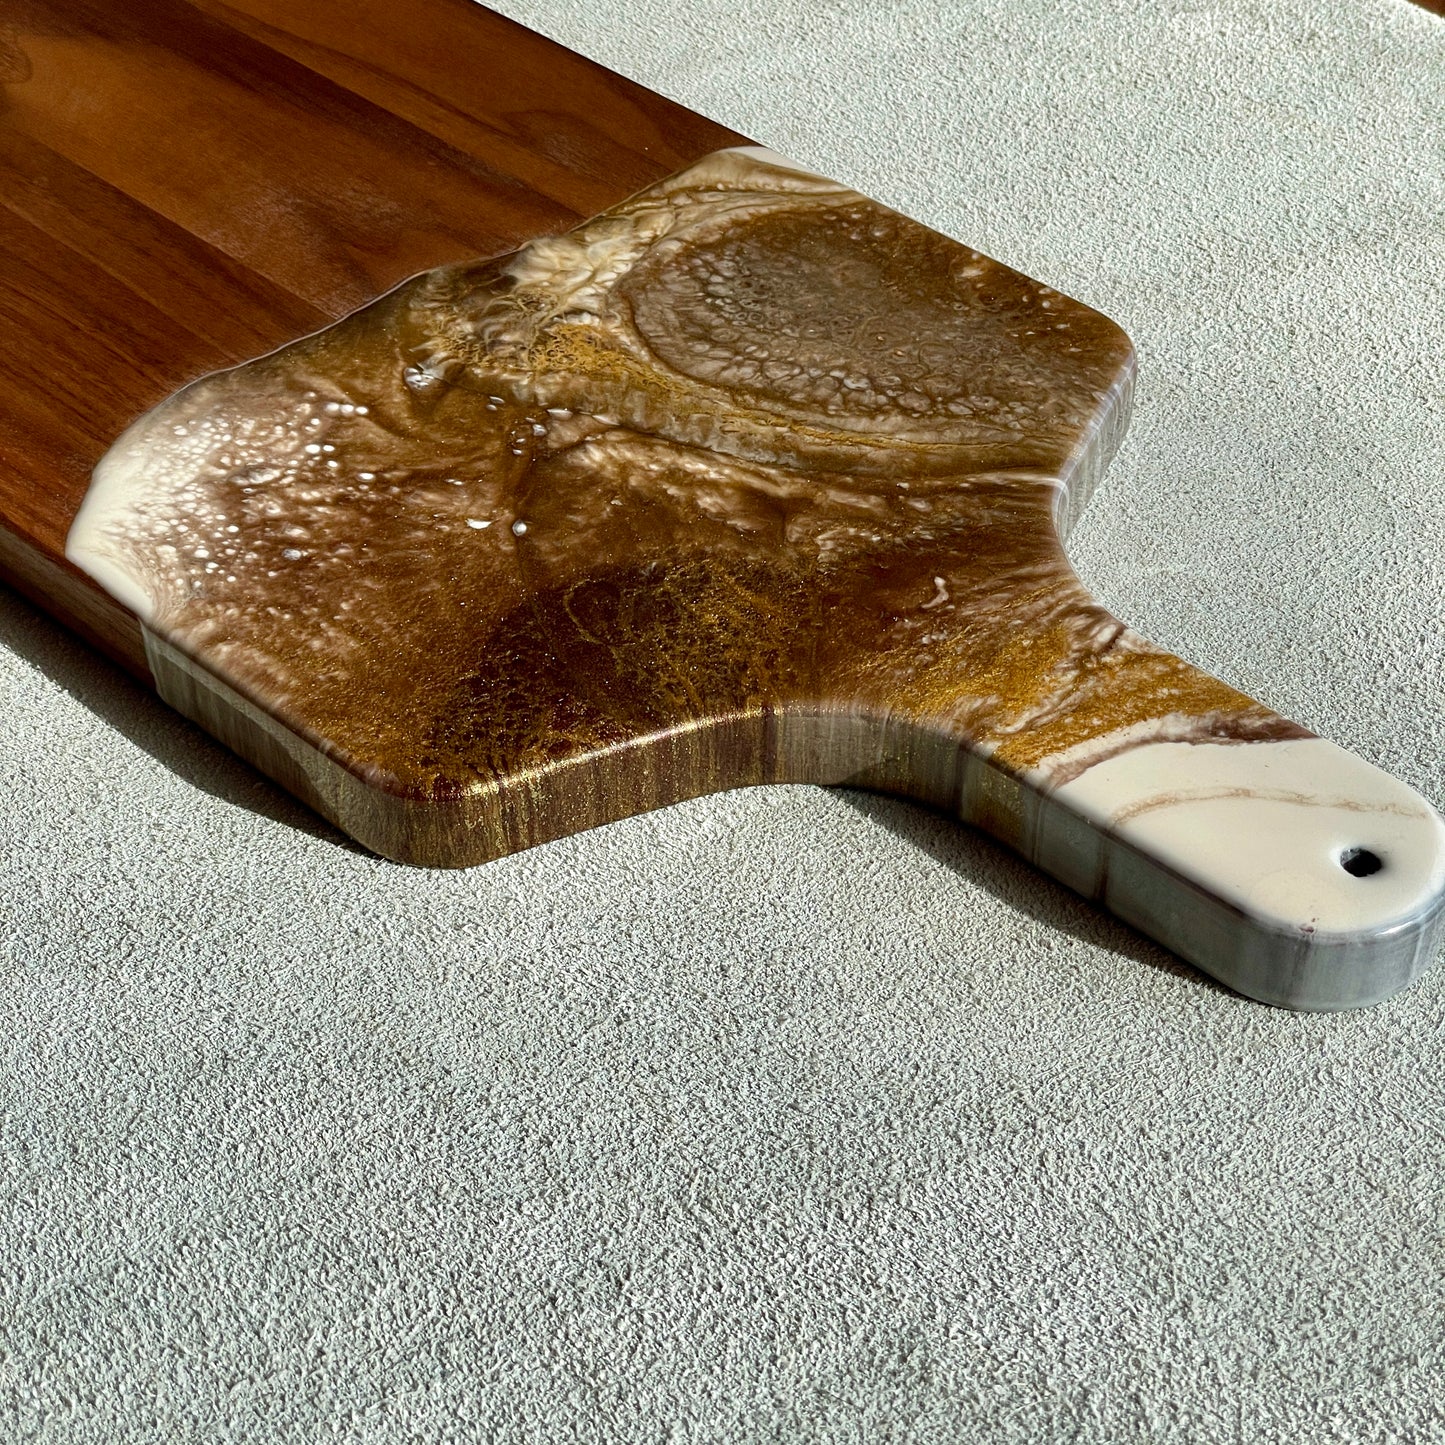 Artisan Walnut Charcuterie Cheese Board Artist: Marcy Knotwell  Brown, ivory and liquid gold resin designs  "You will not be disappointed with the quality of this product! Our handcrafted wood-grain edge charcuterie cheese boards are the answer to stylish, multi-functional, sustainable serve-ware.  When not in use, this charcuterie cheese board makes a beautiful addition to your countertop or gallery wall.